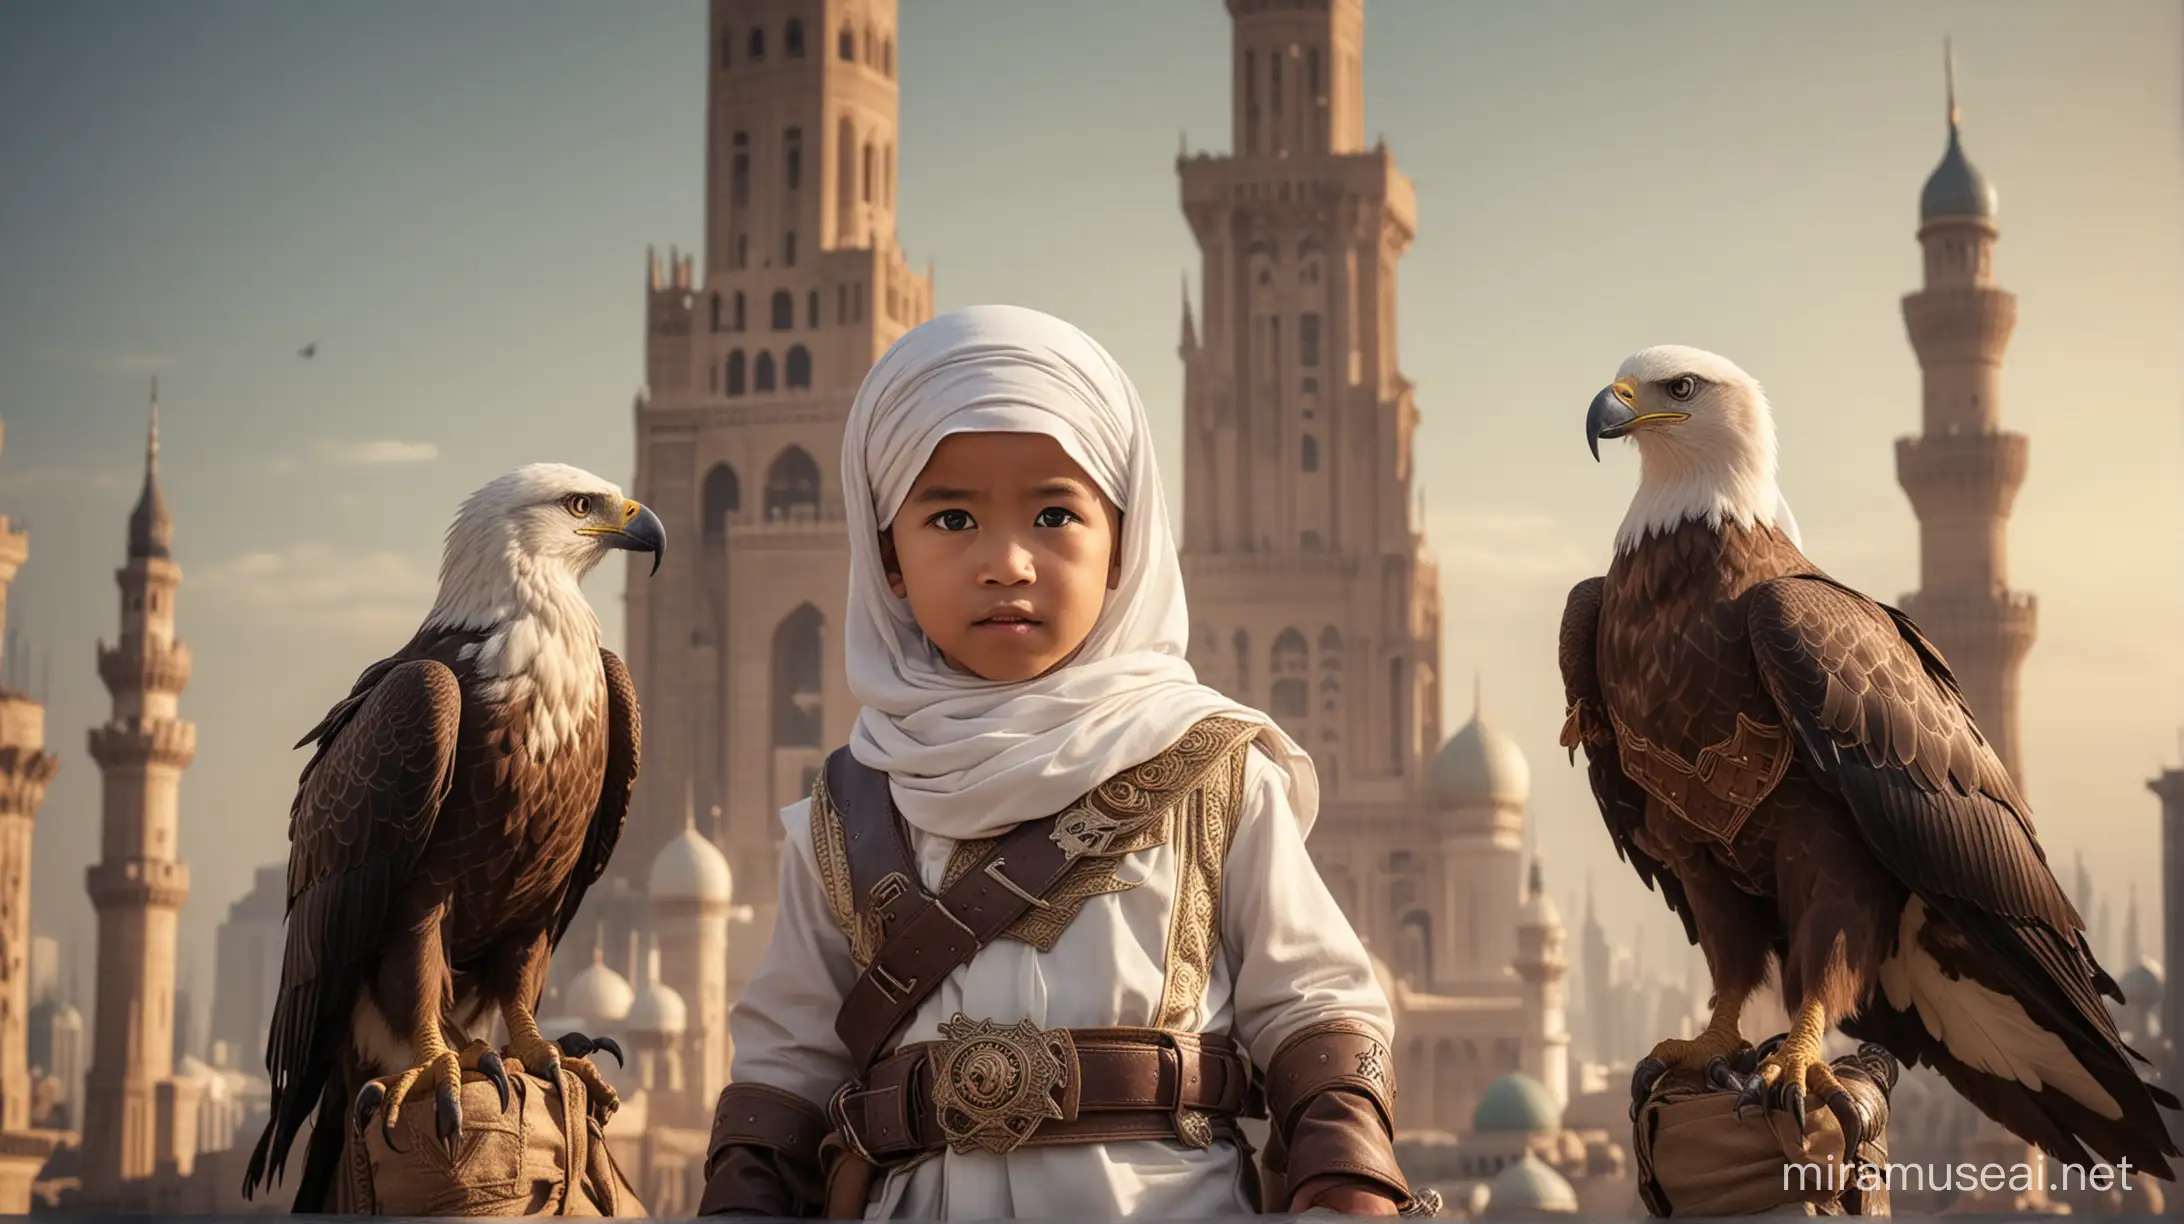 Indonesian Boy in Pure Muslim Arabian Assassin Cosplay with Eagle on Hand